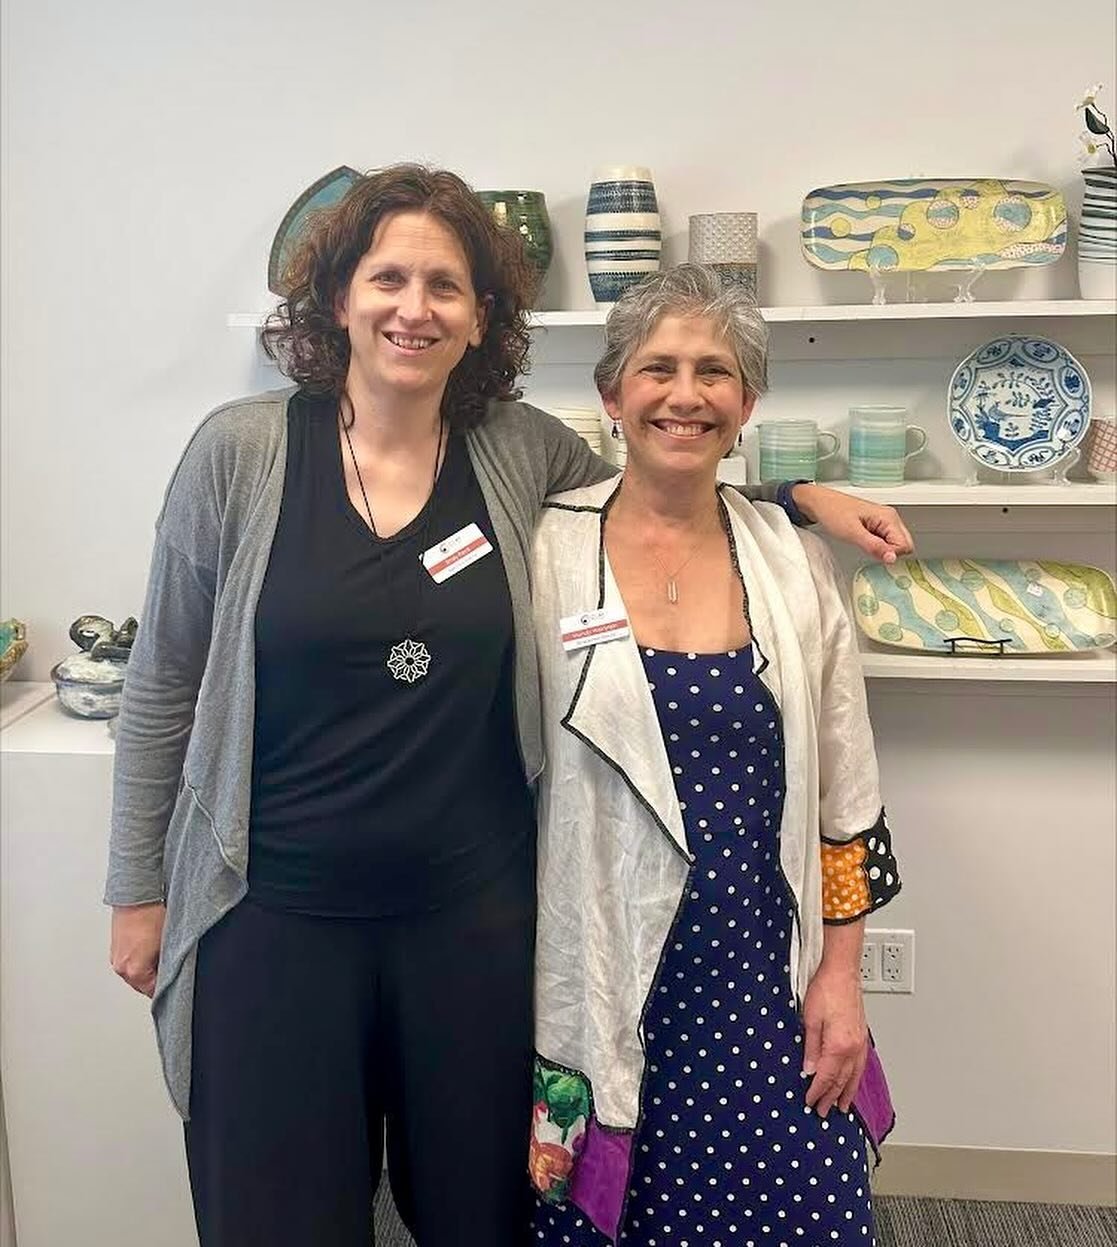 Thank you to everyone who stopped by our booth last night at the First Bank of Greenwich event! It was great to meet so many new people and help them discover a passion for pottery. Seen here is our Executive Director Emily Peck with our Development 